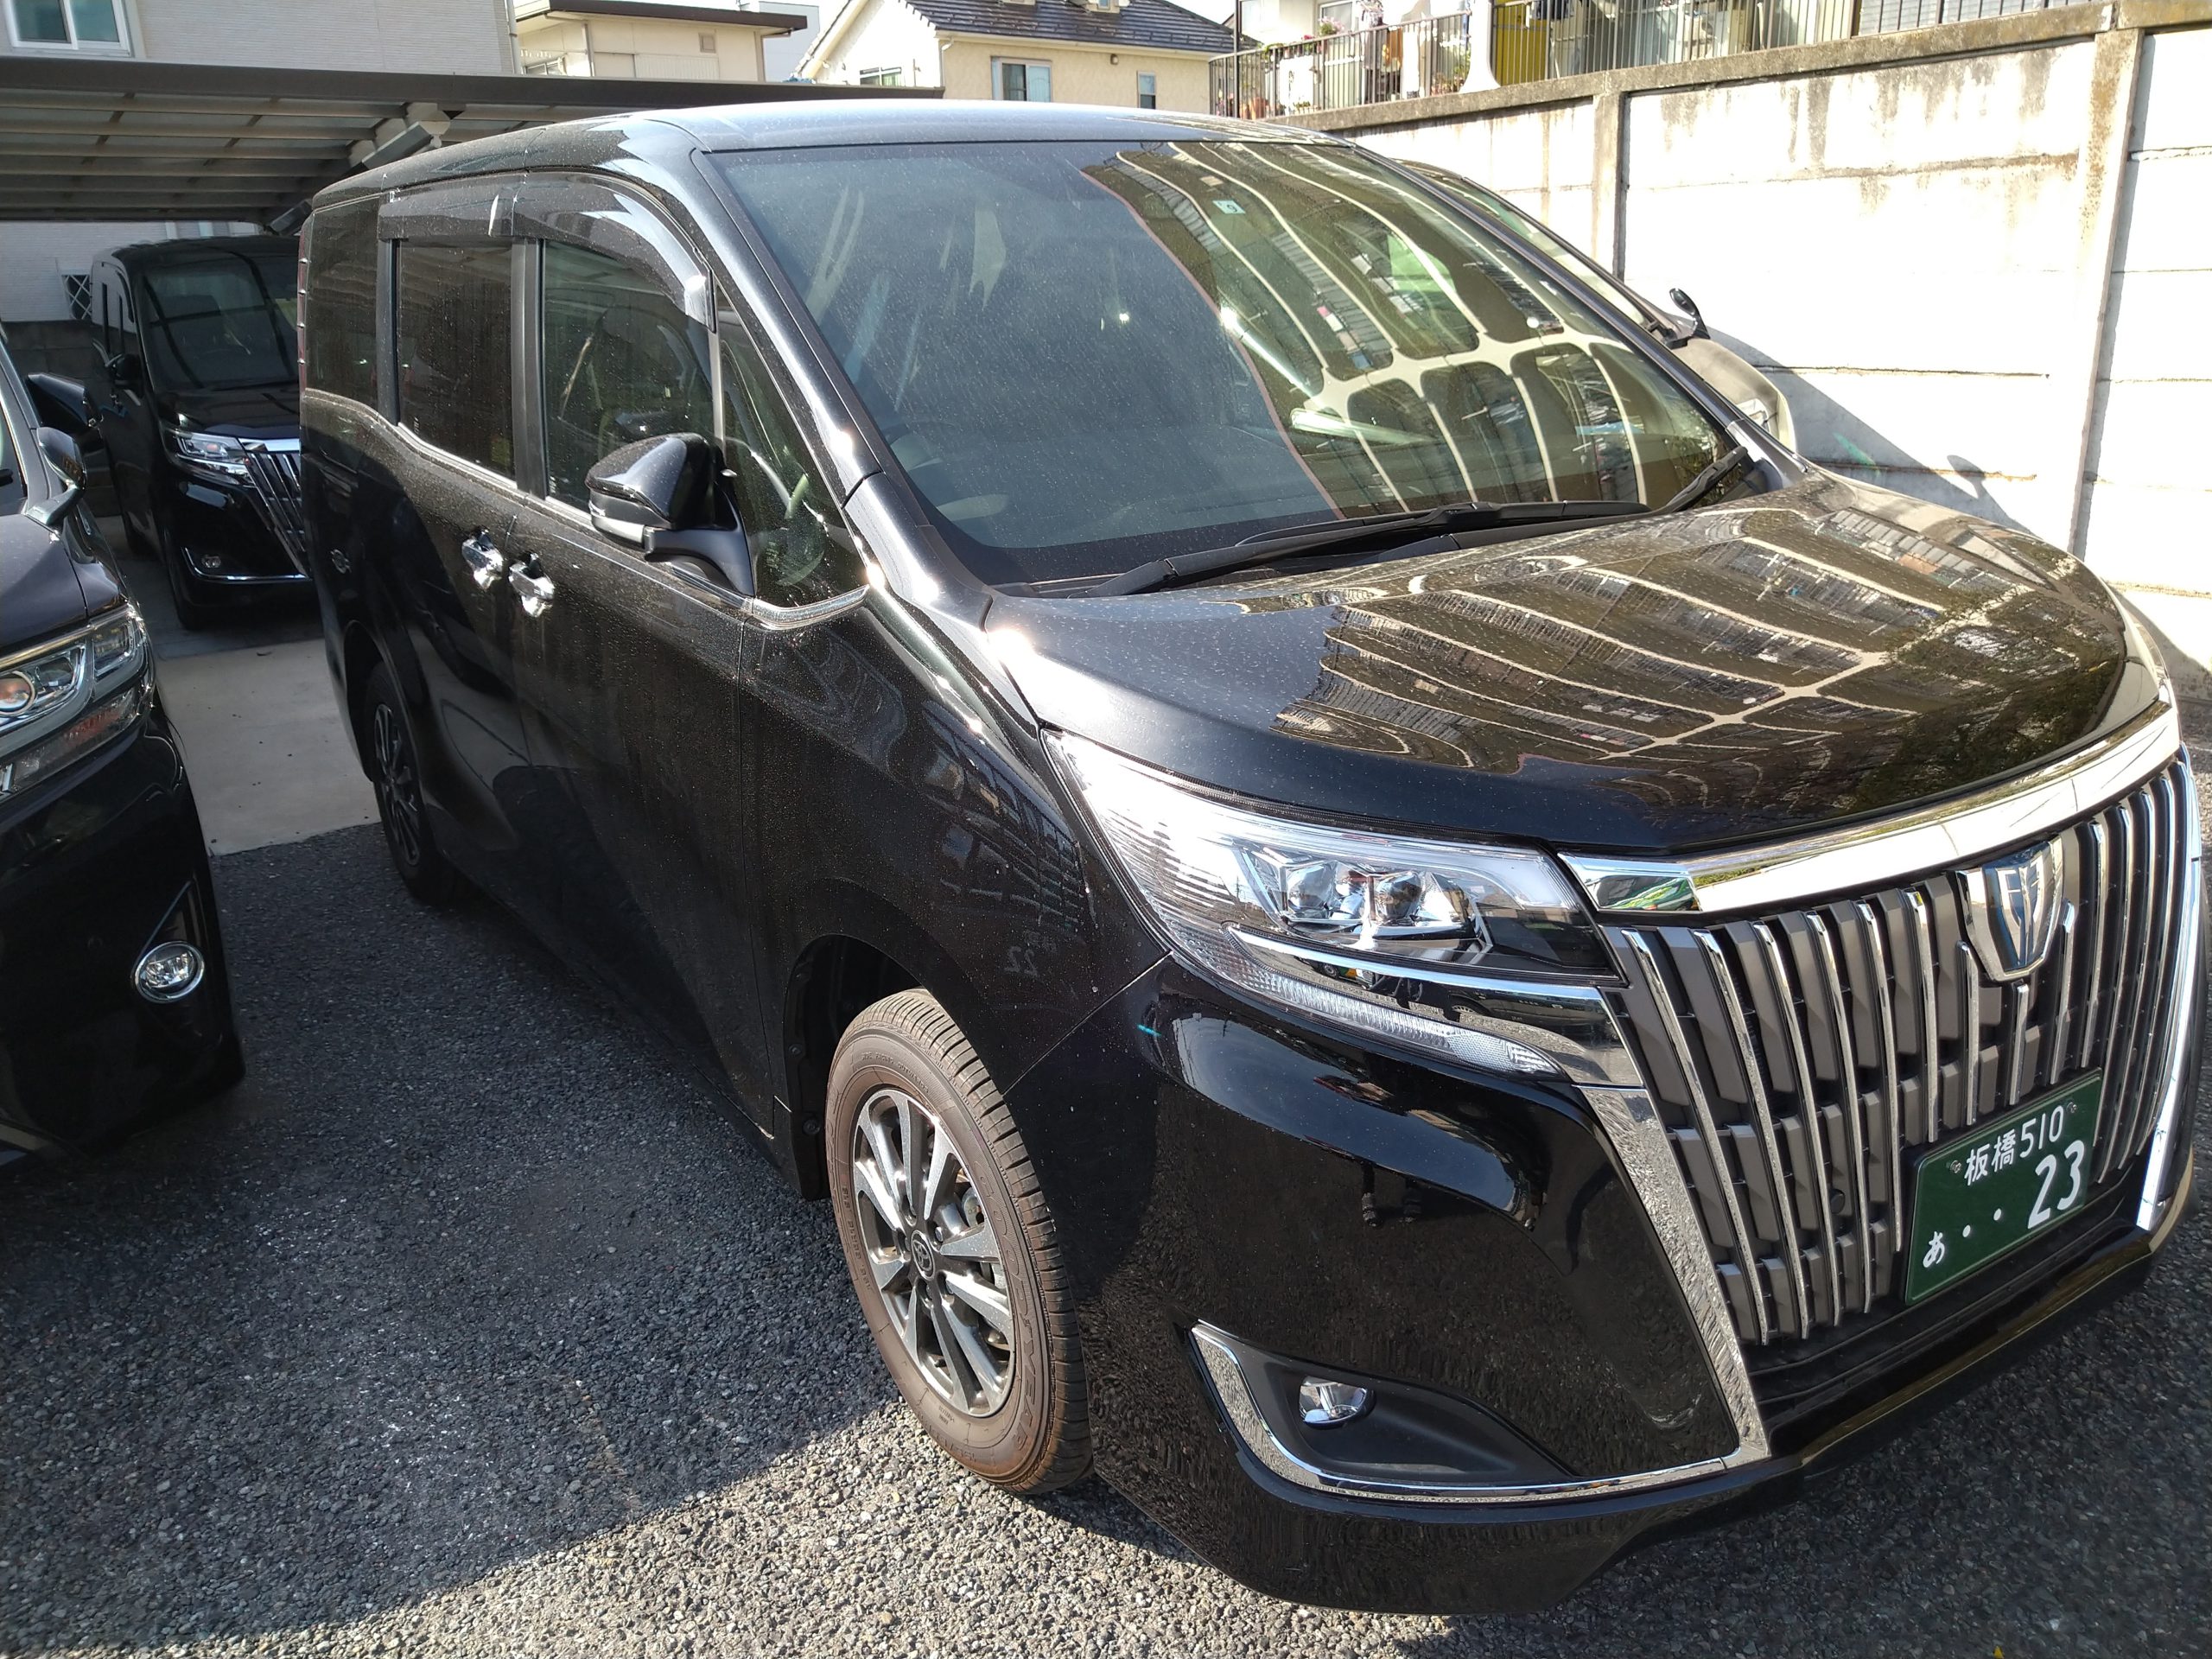 Kaishin offers luxury minivans that are comfortable, spacious and easy to get in and out.｜TOYOTA ESQUIRE